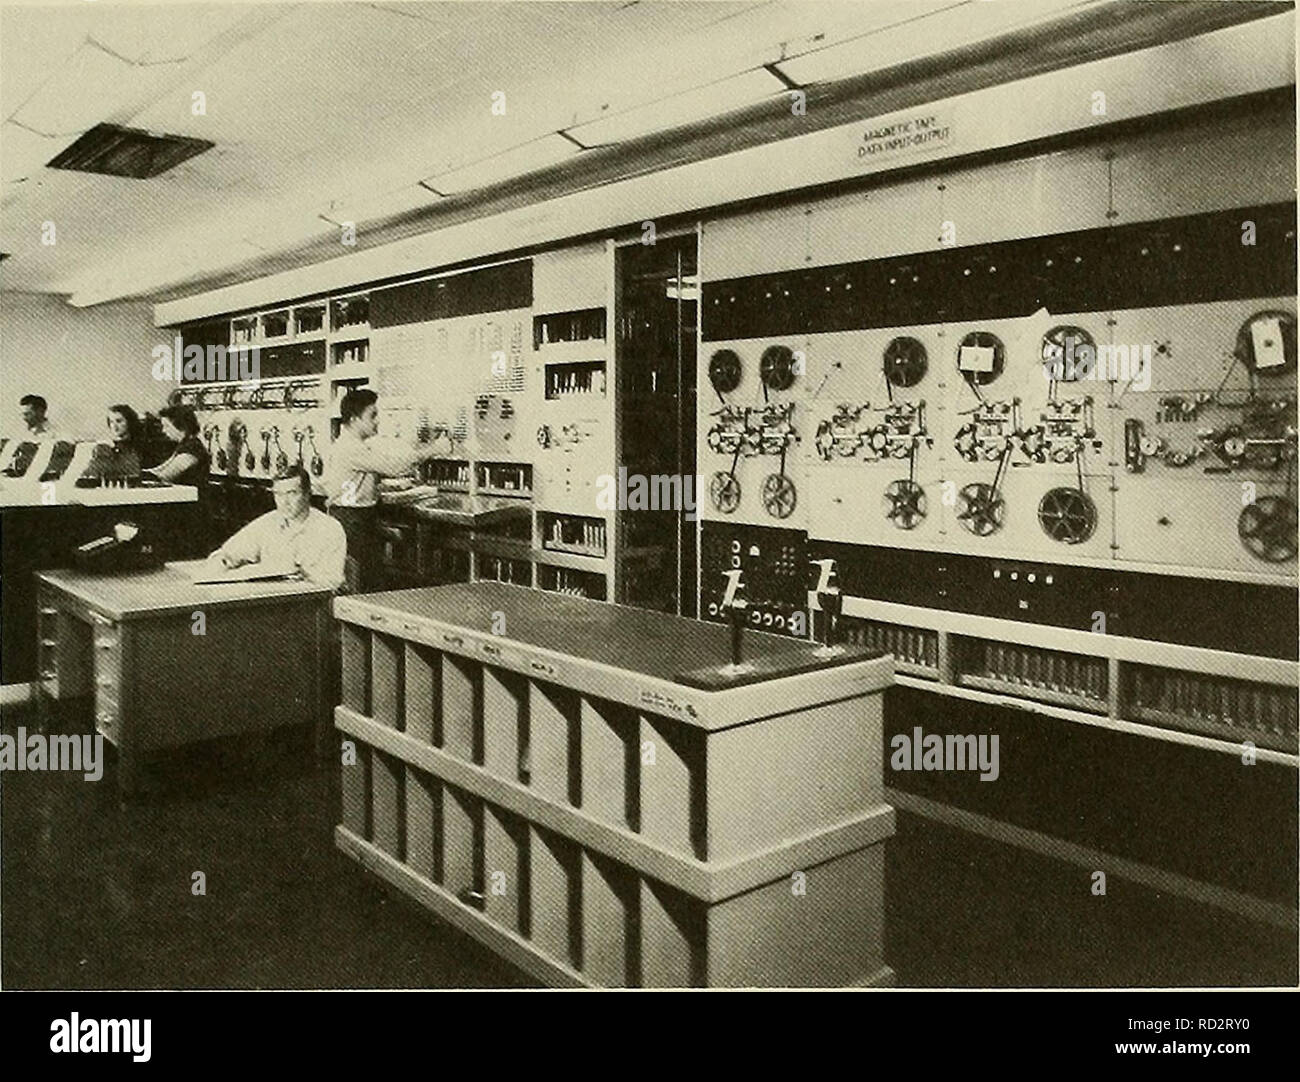 . Dahlgren. Dahlgren Laboratory. Development of Computer Technology 127. MARK III Aiken Dahlgren Electronic Calculator. felt that technology was moving along rapidly, and we felt that in order to get the best computer for our needs the Navy had to sponsor development. Around 1958, there was a committee put together to look at Navy needs, and they surveyed a lot of installations. They came to the conclusion that we should talk to some computer manufacturers like IBM, UNIVAC, and maybe Bur- roughs. They came to the conclusion that the way to get the best computer was to sponsor a development, an Stock Photo